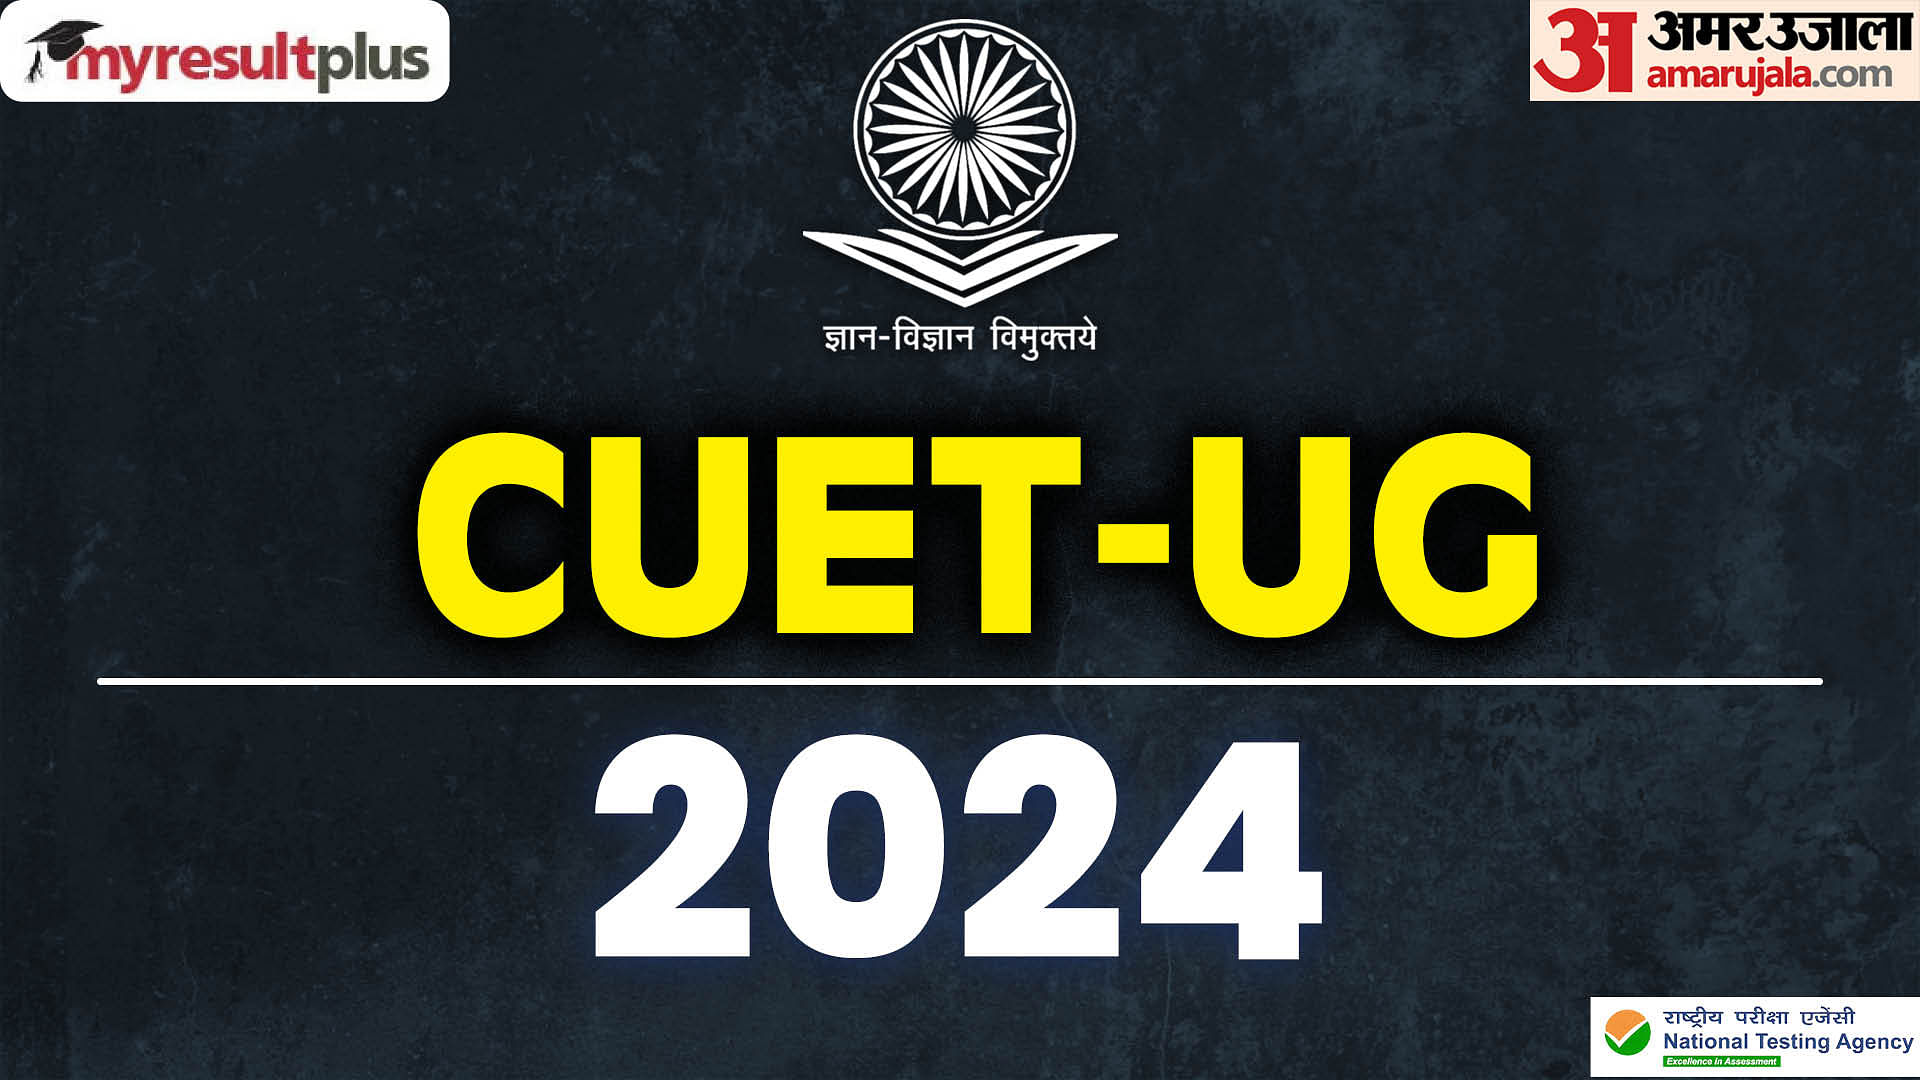 CUET UG 2024 city intimation slip today, Check and download here, Read all details